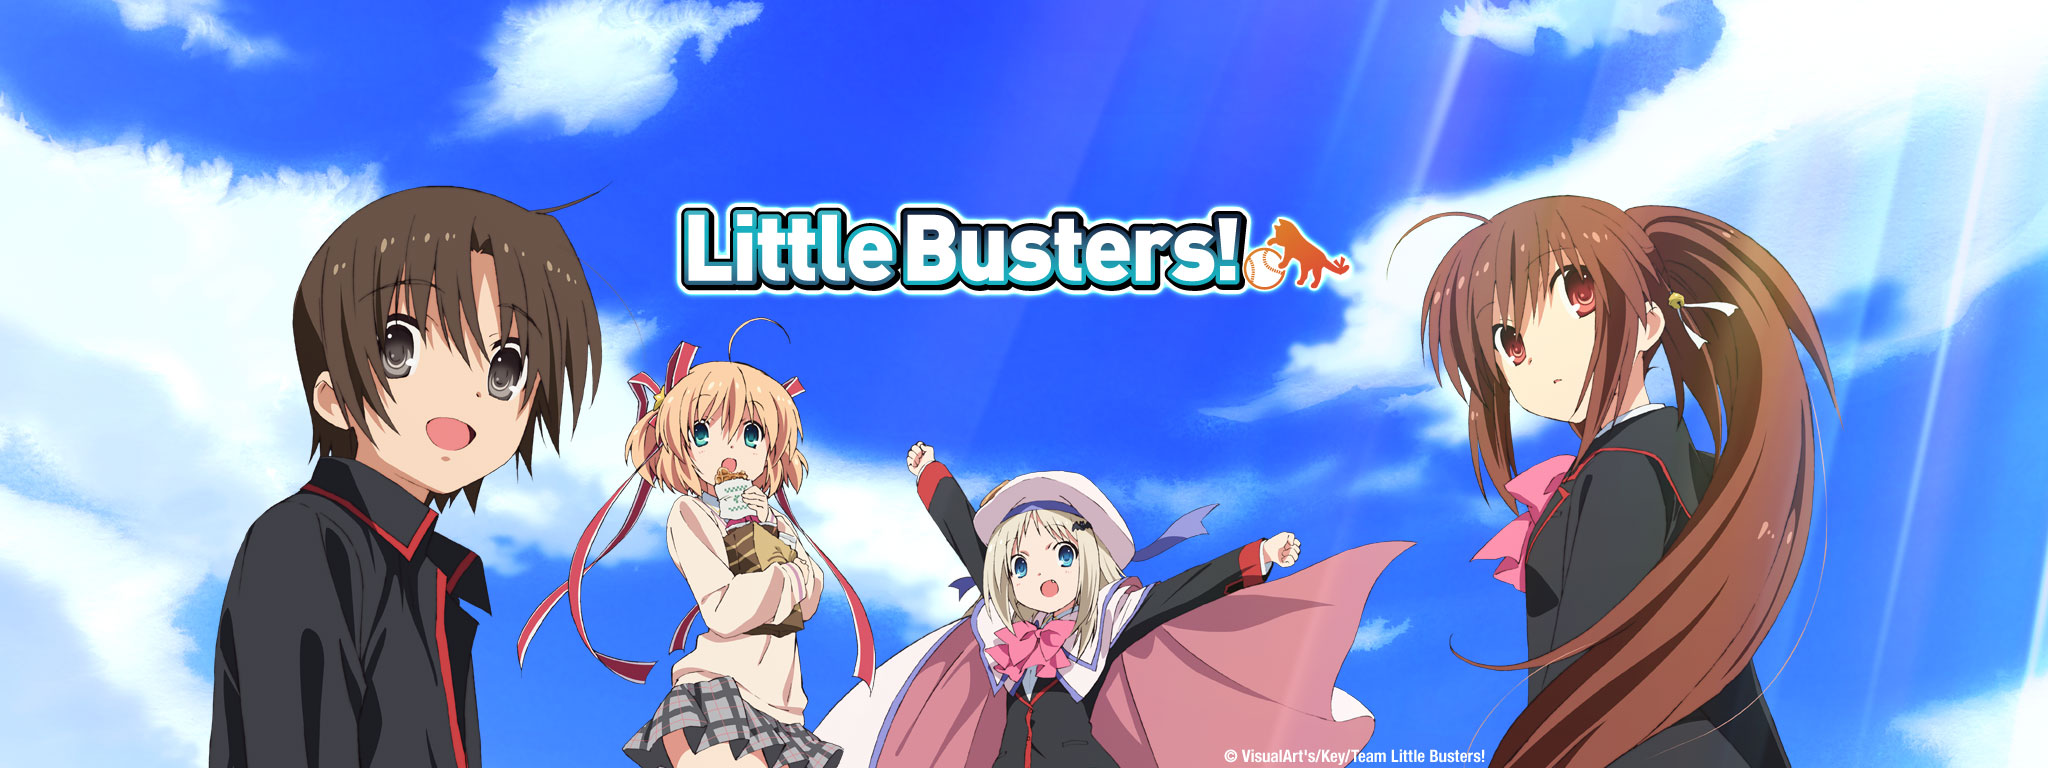 Title Art for Little Busters!